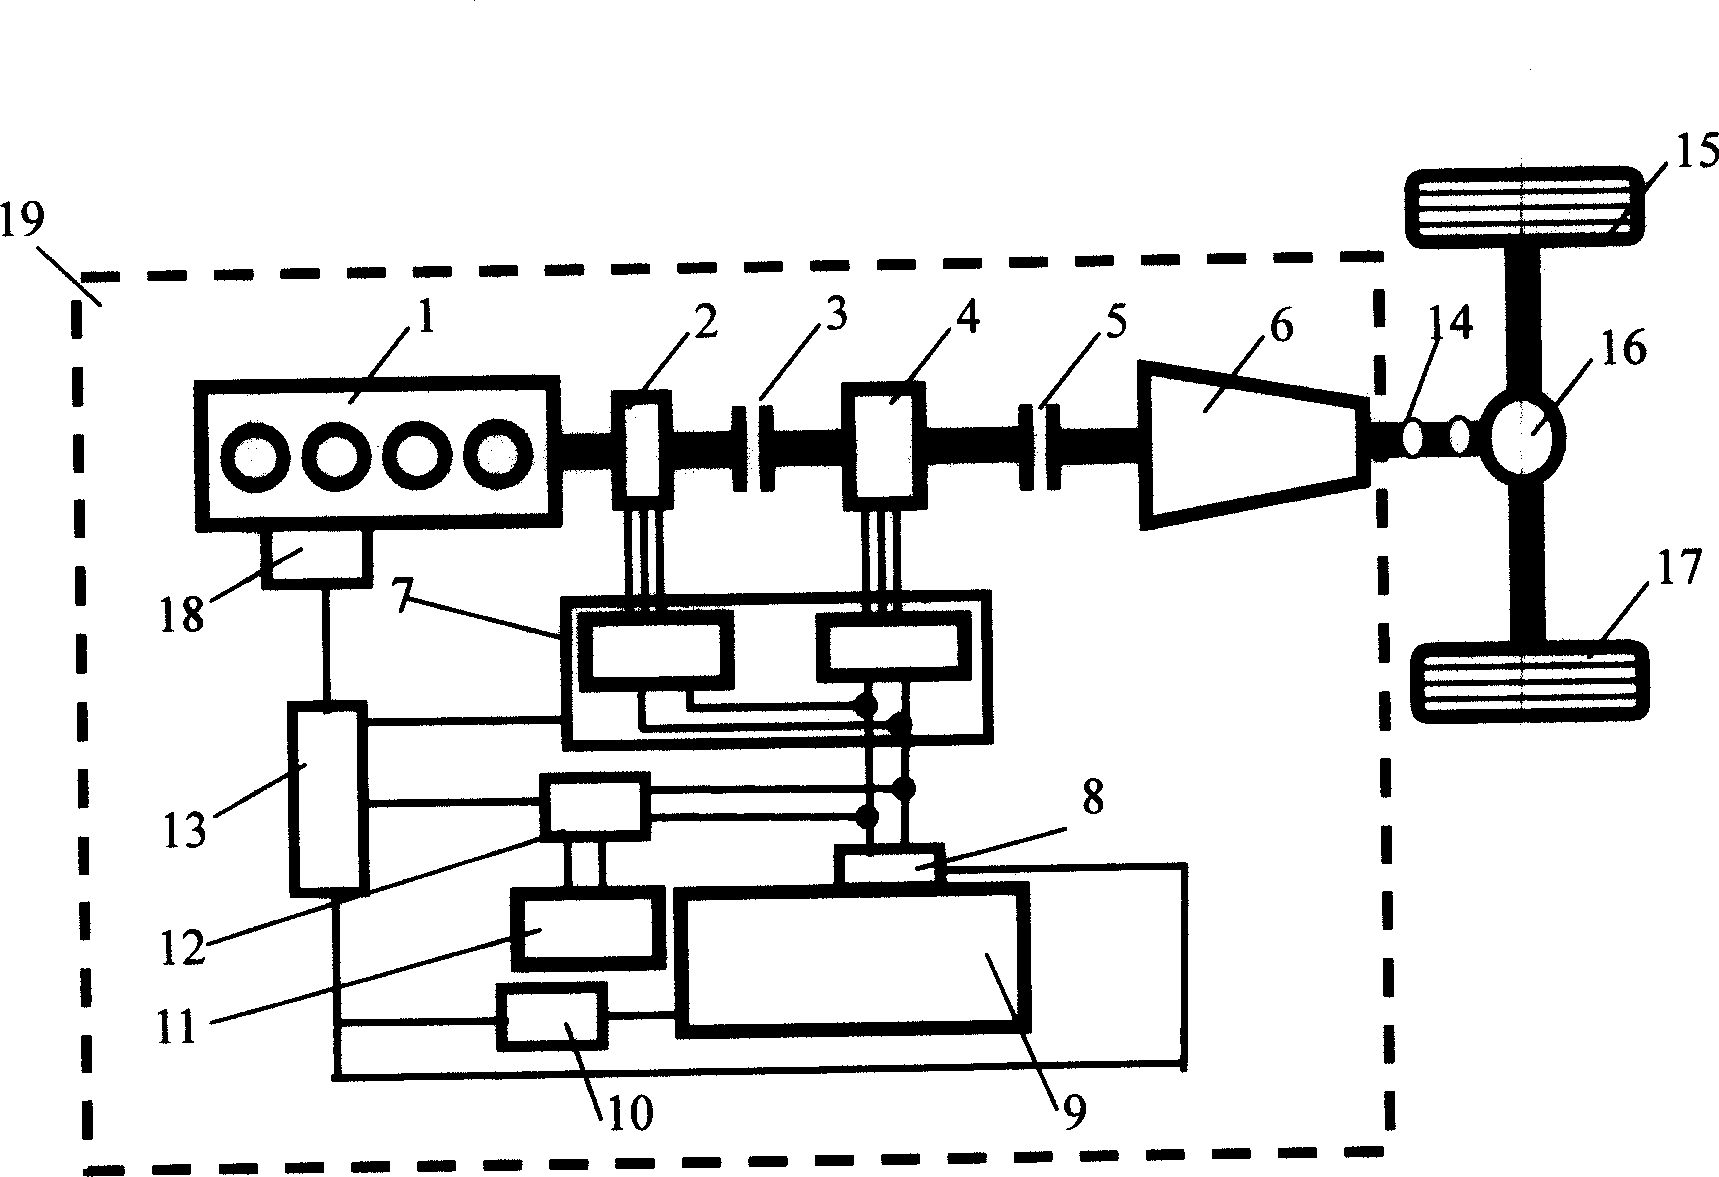 Series-parallel mixed power system